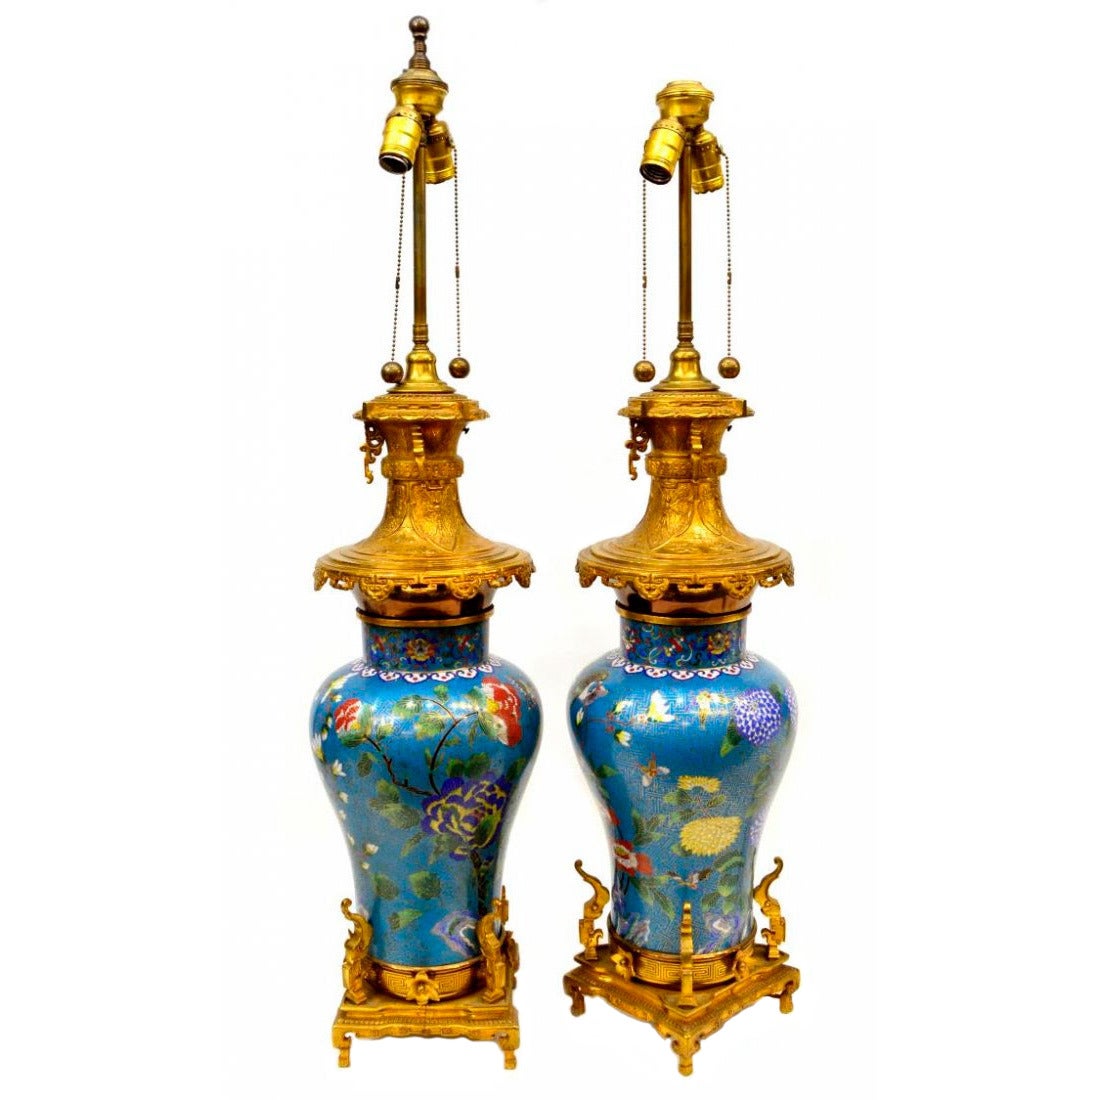 Pair of Chinese Cloisonne Enamel Baluster Form Vases Made into Lamps